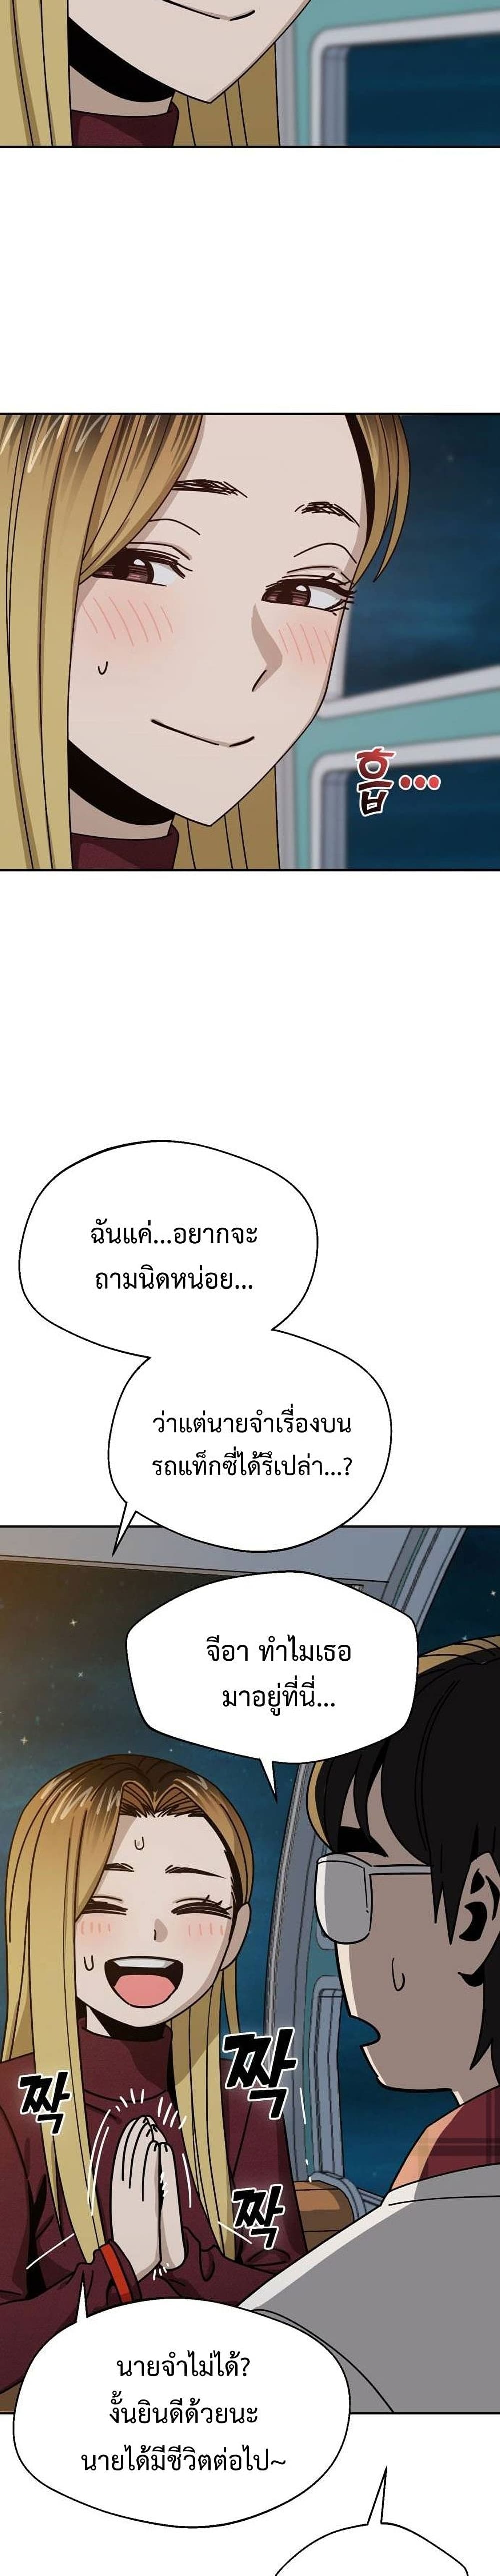 Match Made in Heaven by chance ตอนที่ 35 (32)